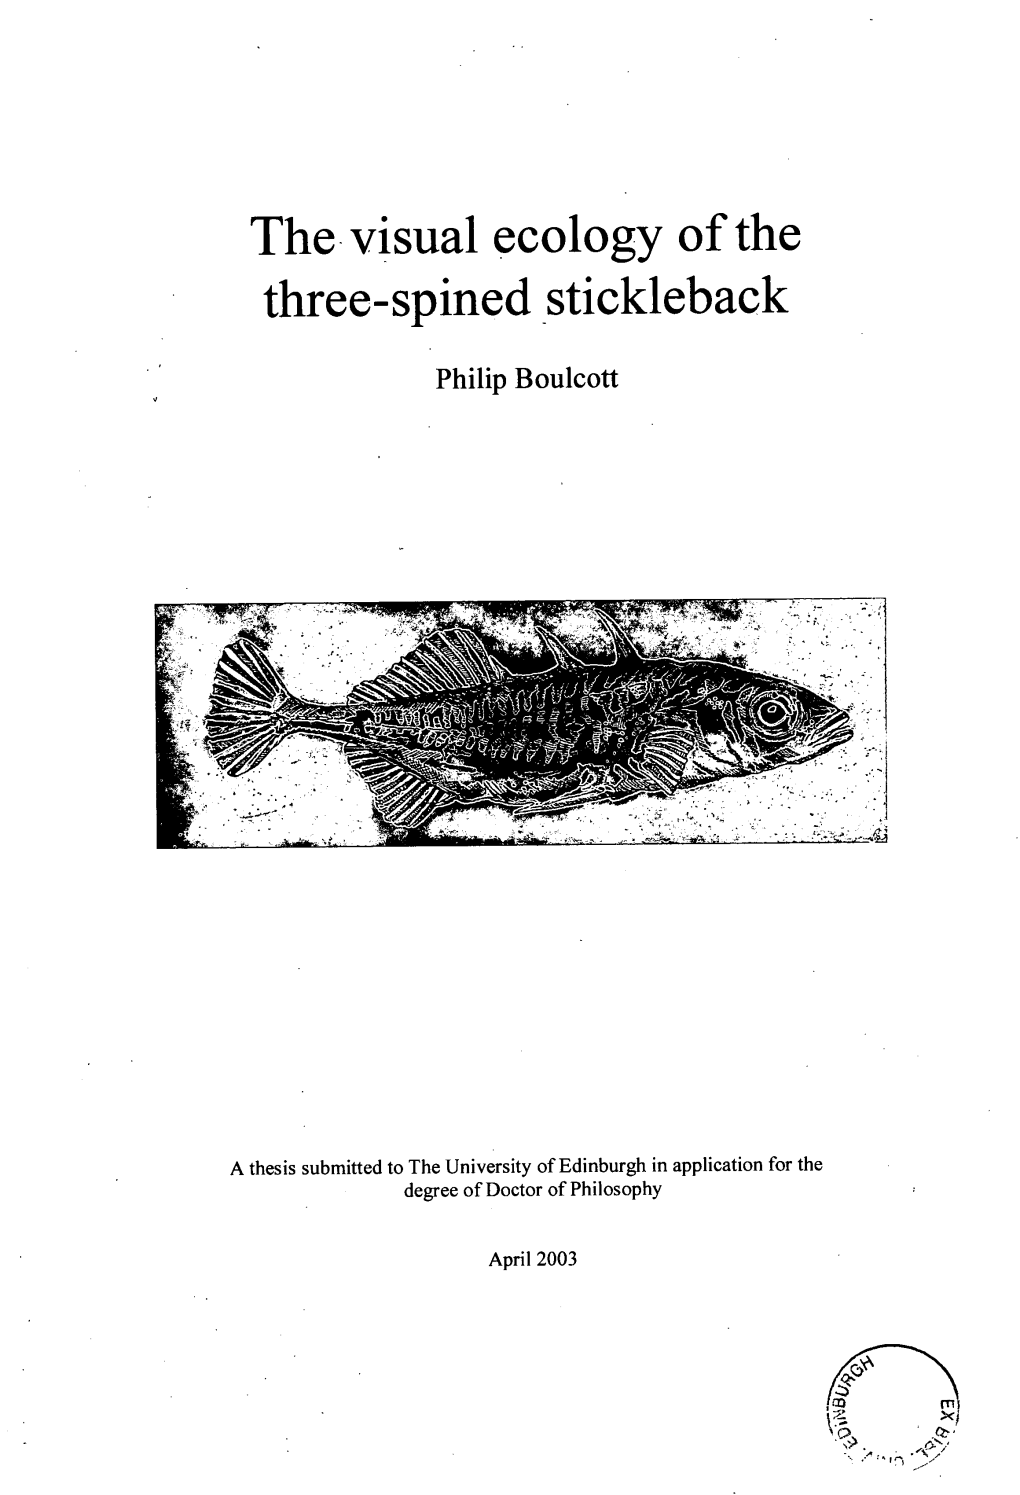 The- Visual Ecology of the Three-Spined Stickleback